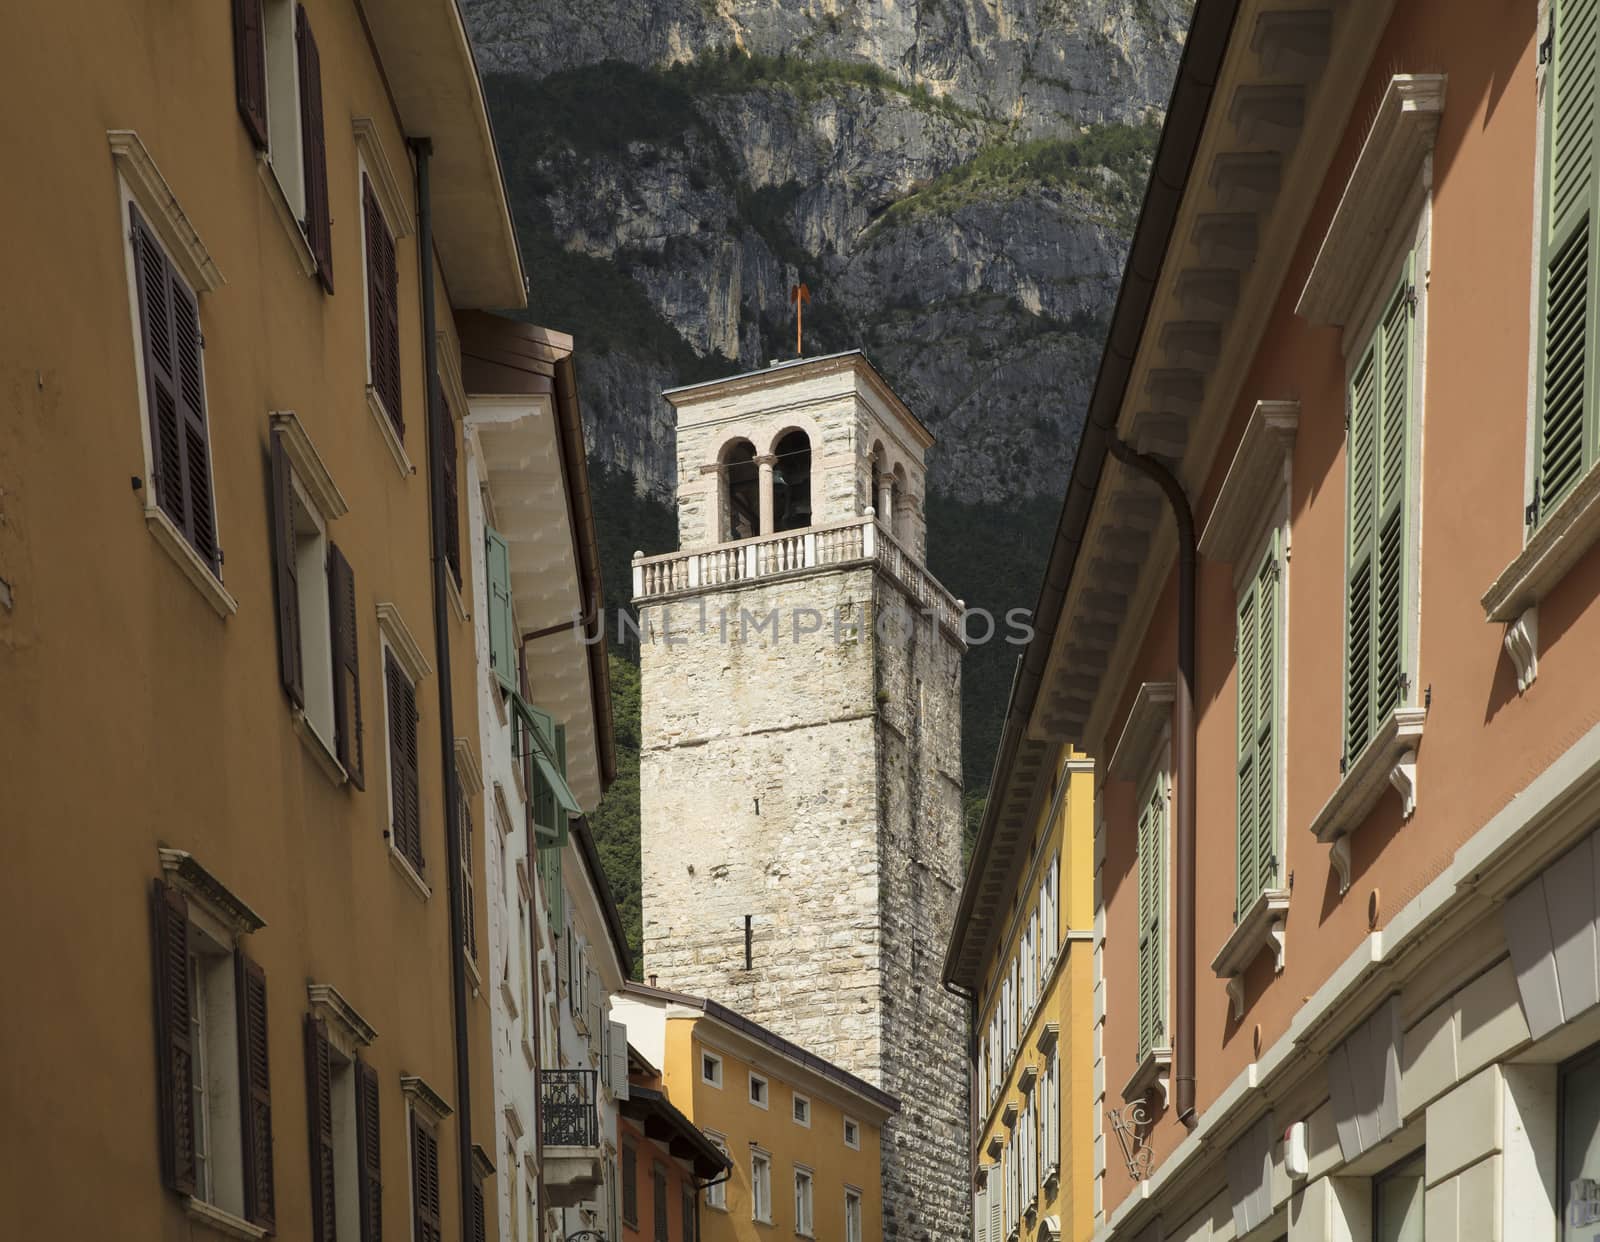 Riva Del Garda, Italy, Europe, August 2019, The historic Tower A by ElectricEggPhoto